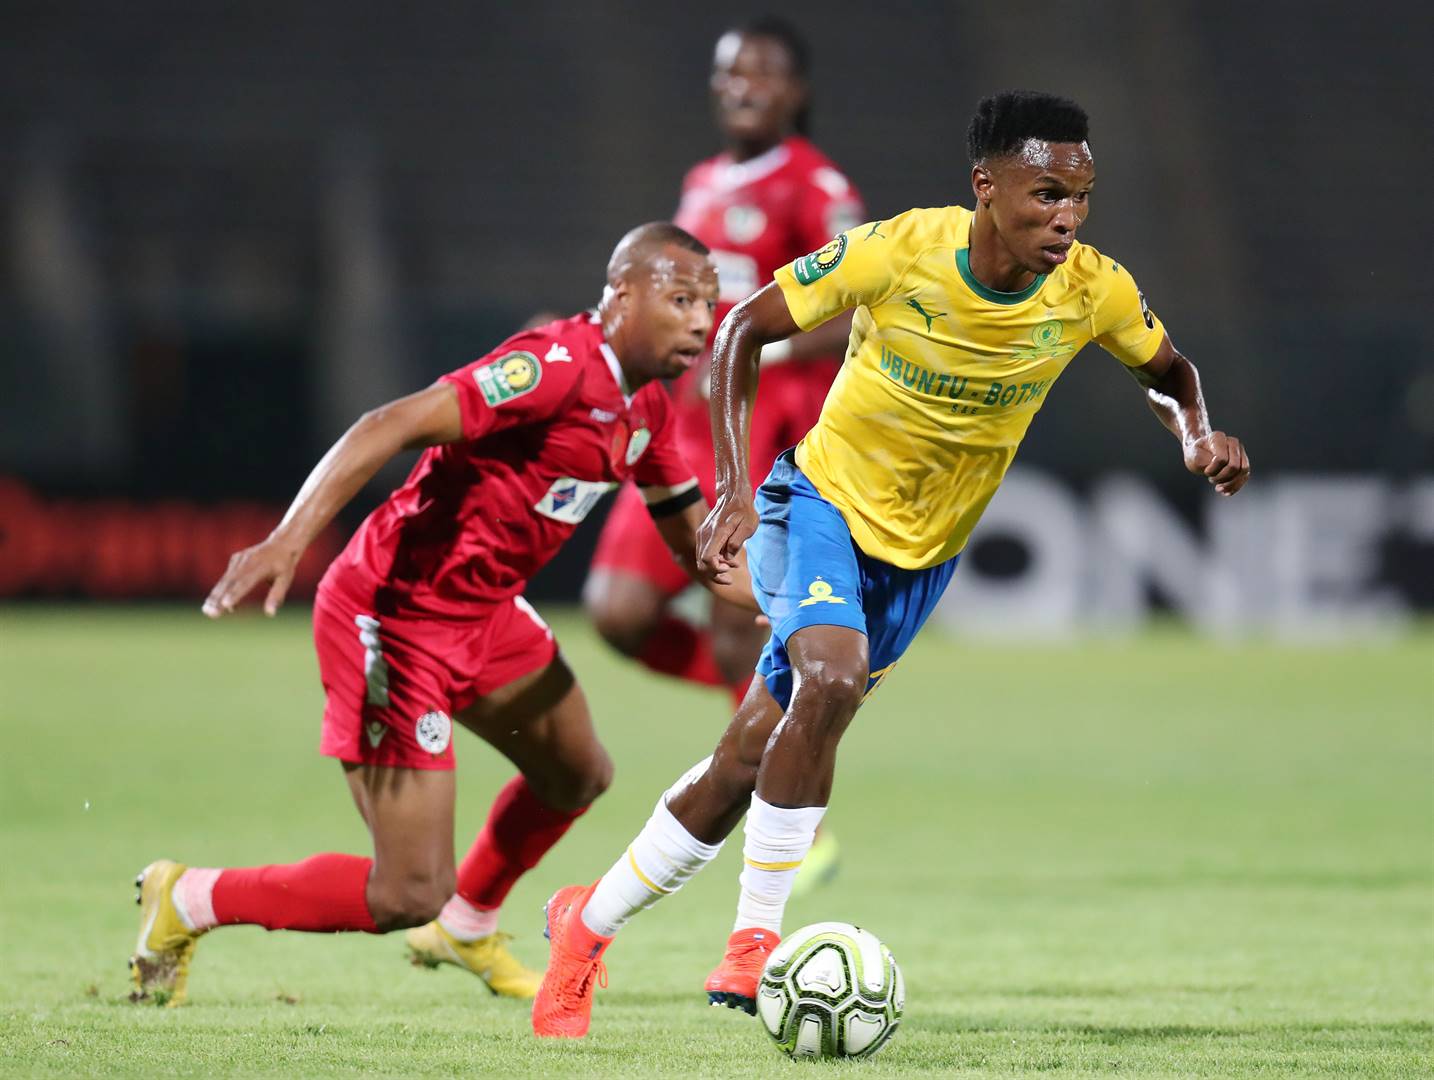 Themba Zwane of Mamelodi Sundowns is challenged by Brahim Nakach of Wydad during the 2019 TOTAL CAF Champions League match at the Lucas Moripe Stadium, Atteridgeville on January 19 2019 . Picture: Muzi Ntombela/BackpagePix